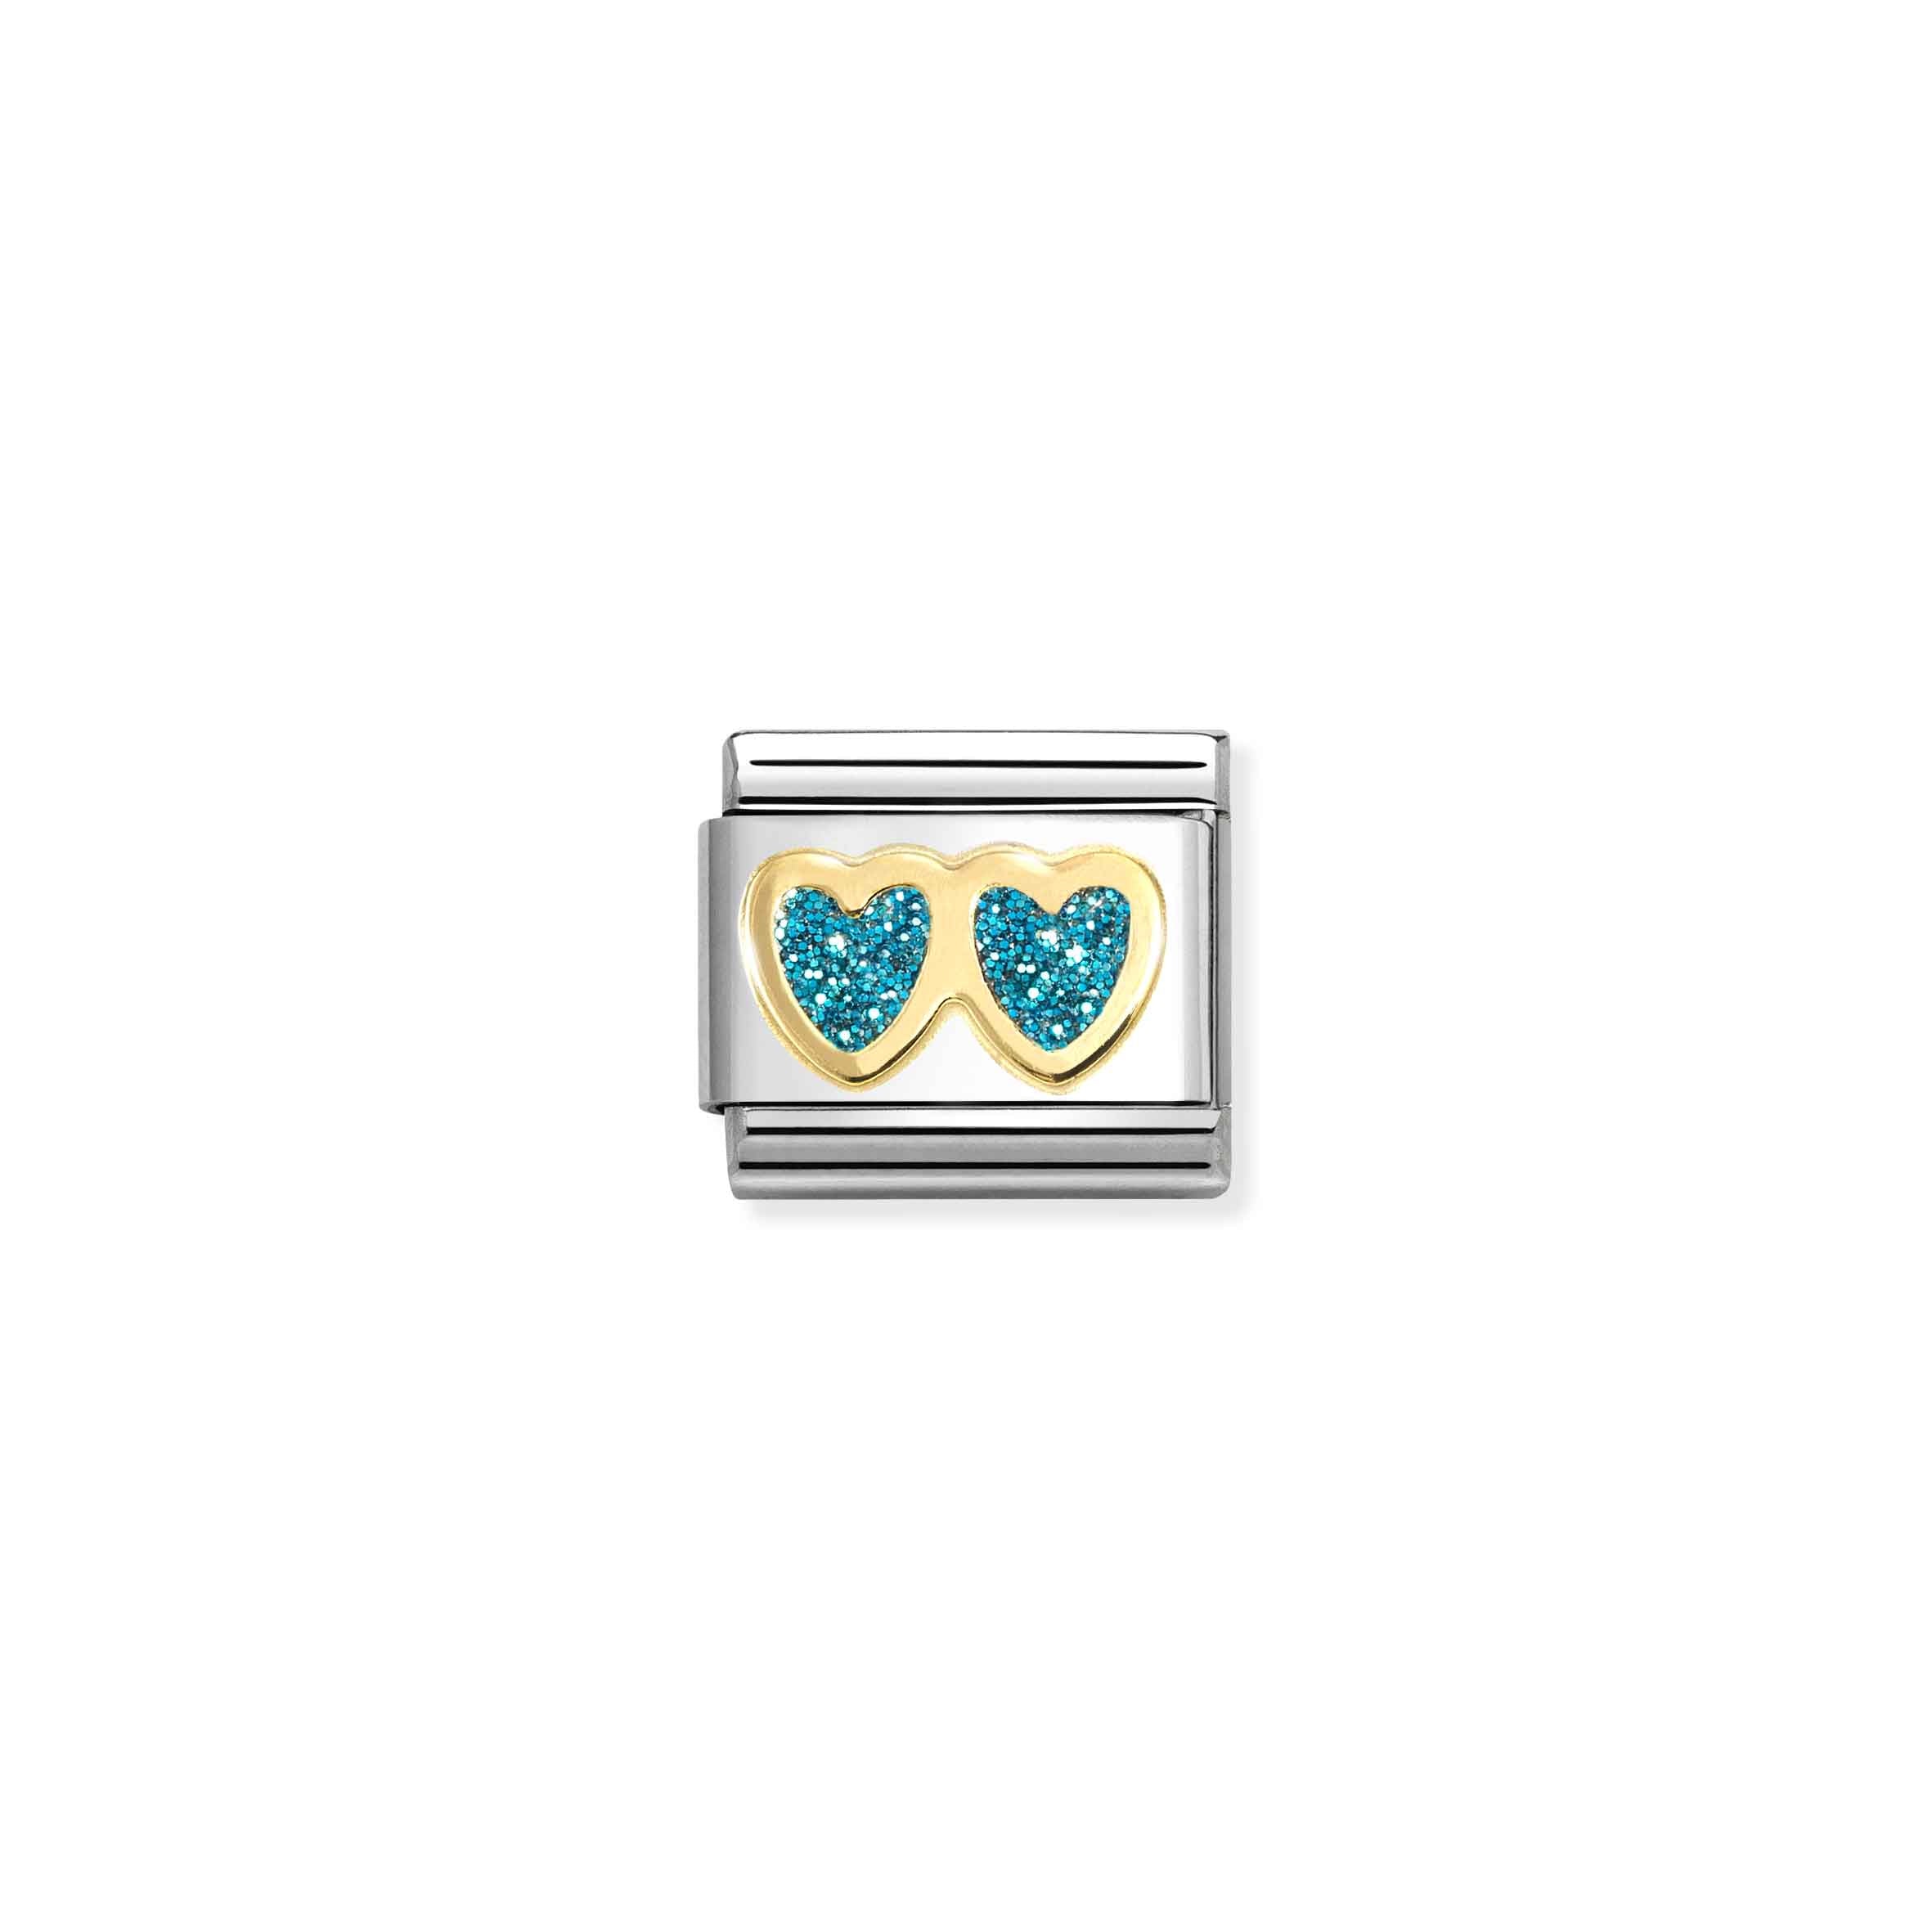 Nomination Yellow Gold Turquoise Glitter Double Heart Charm